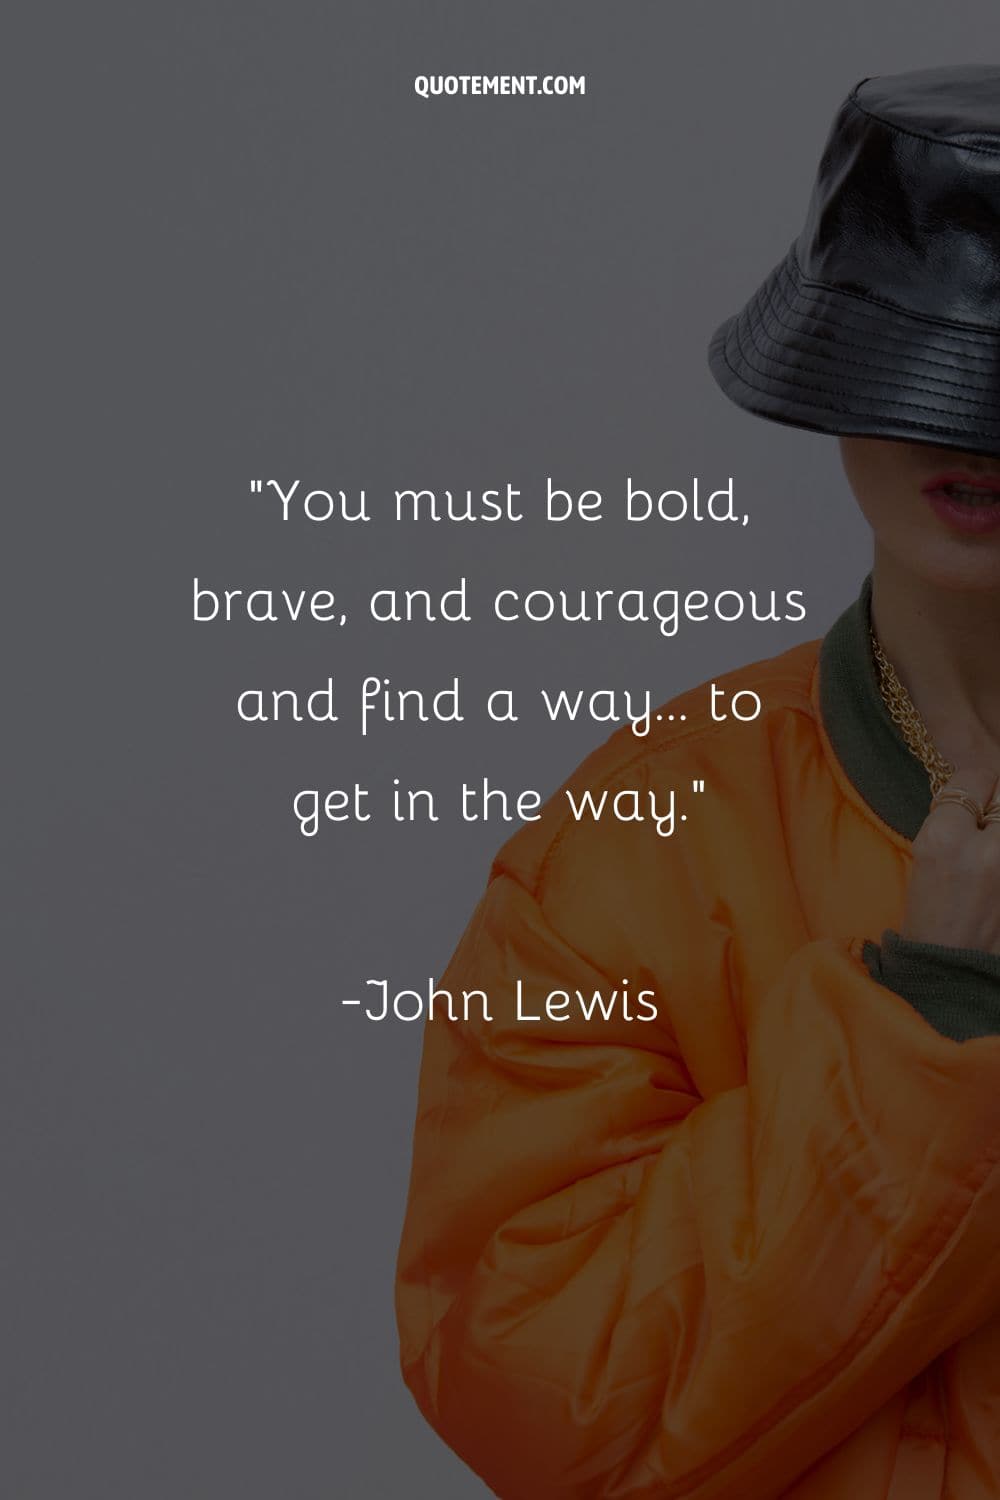 Image of a woman in an orange jacket representing the best swag quote.
